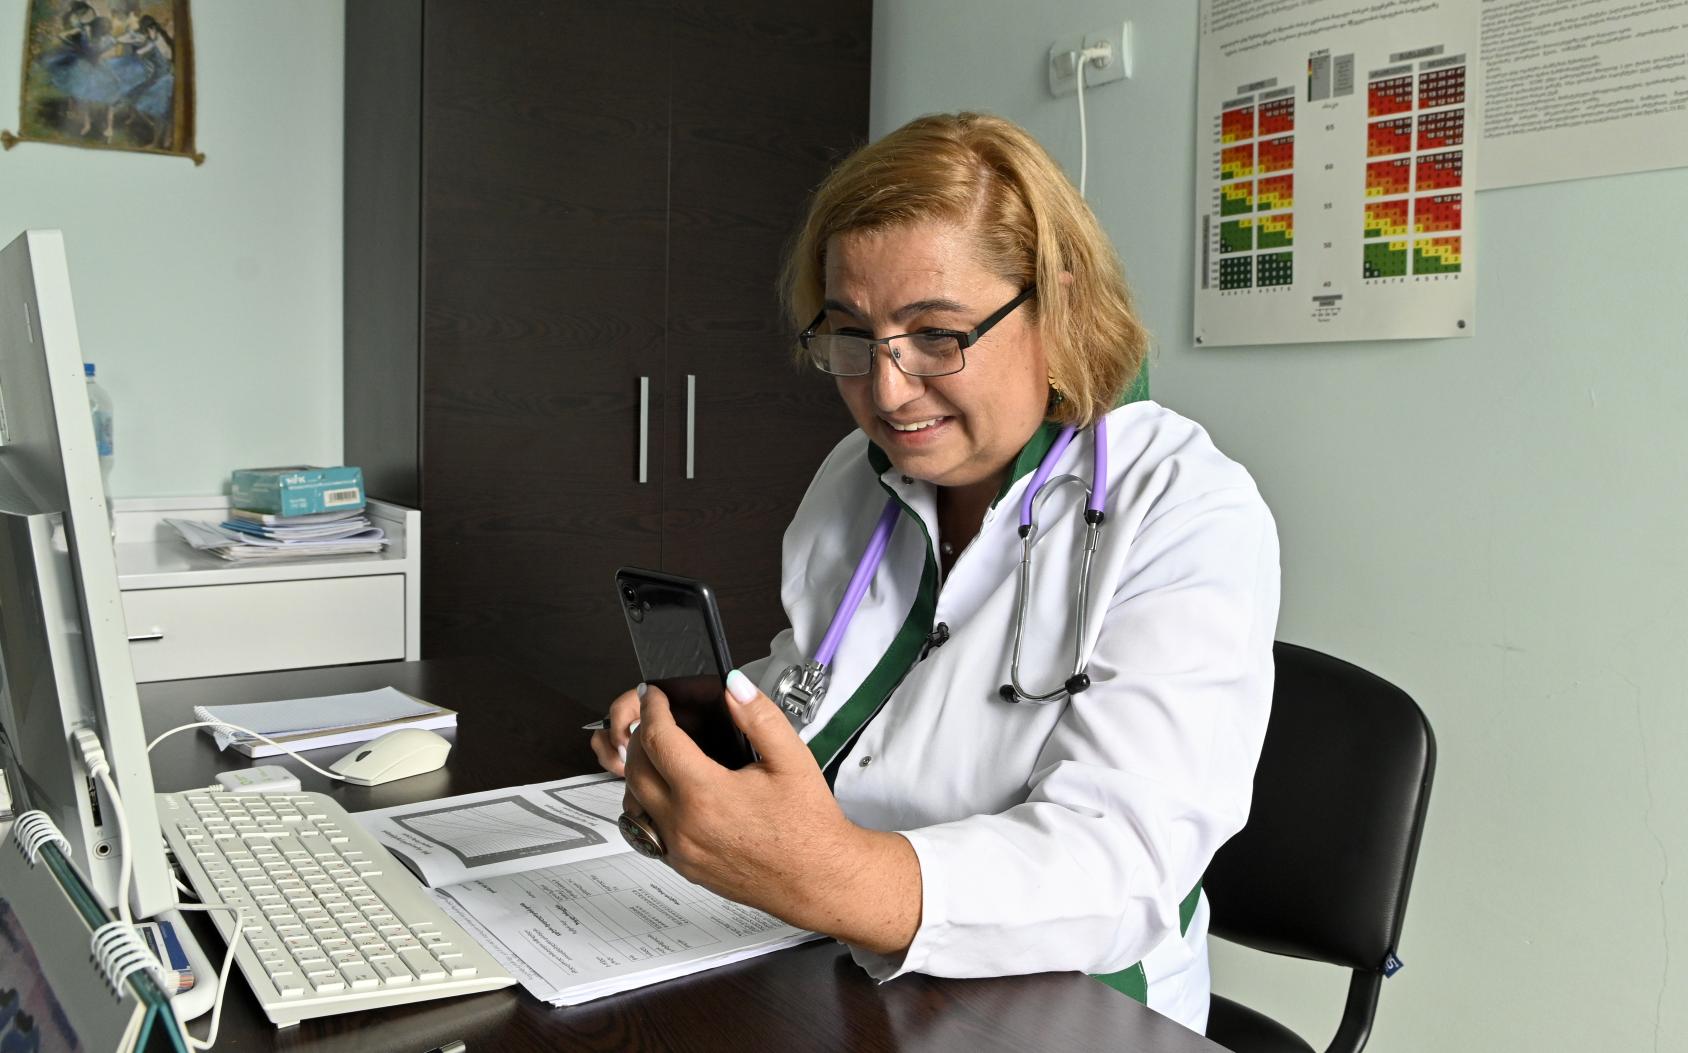 A woman in a white doctor's coat and stethoscope holds up a mobile phone as she sits at a desk in a clinic.